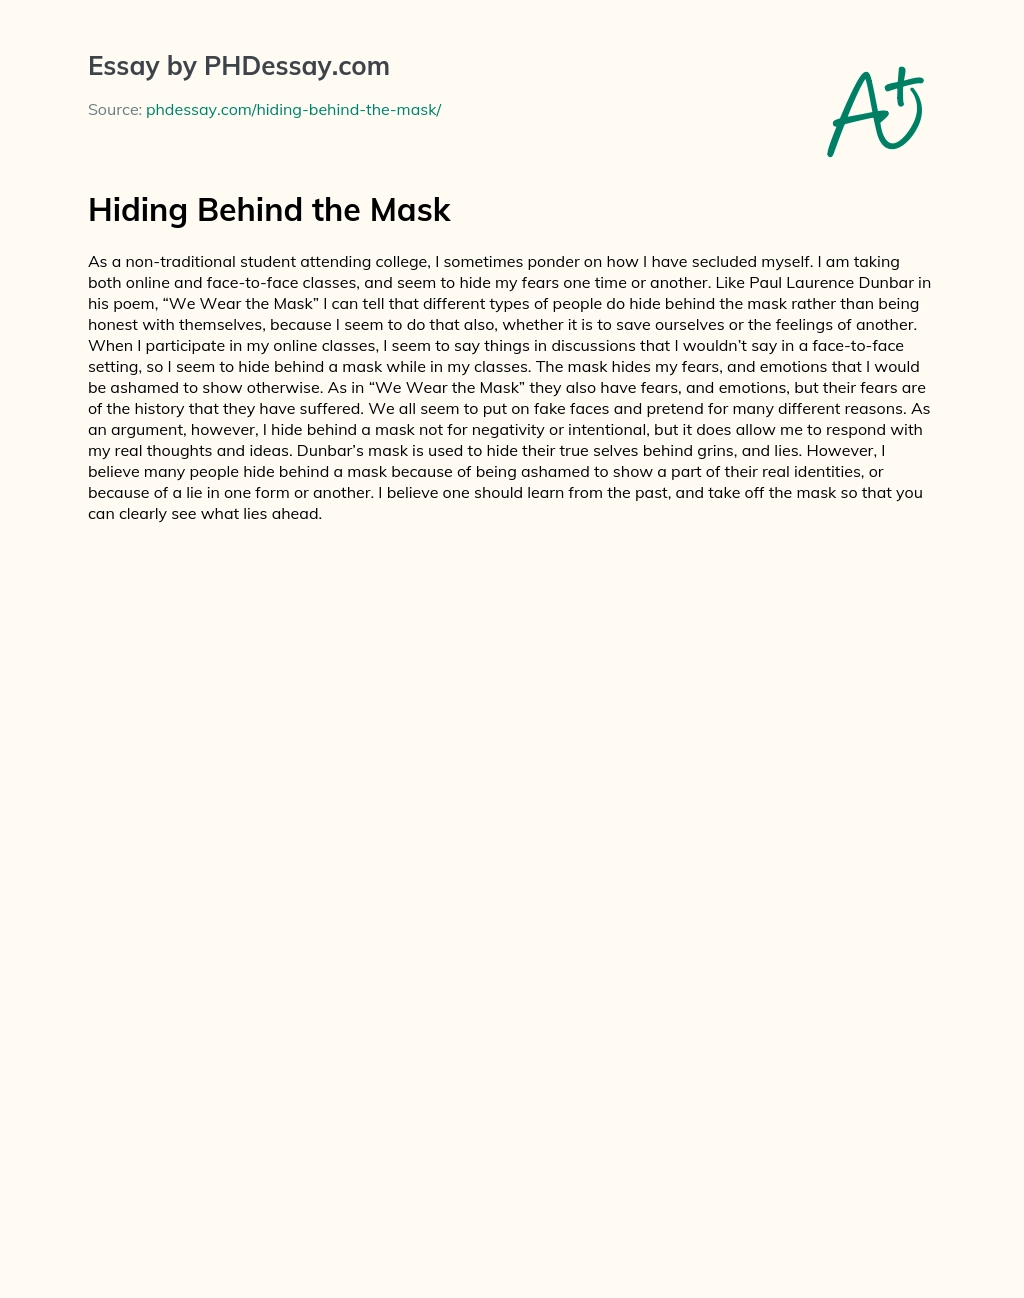 Hiding Behind the Mask essay